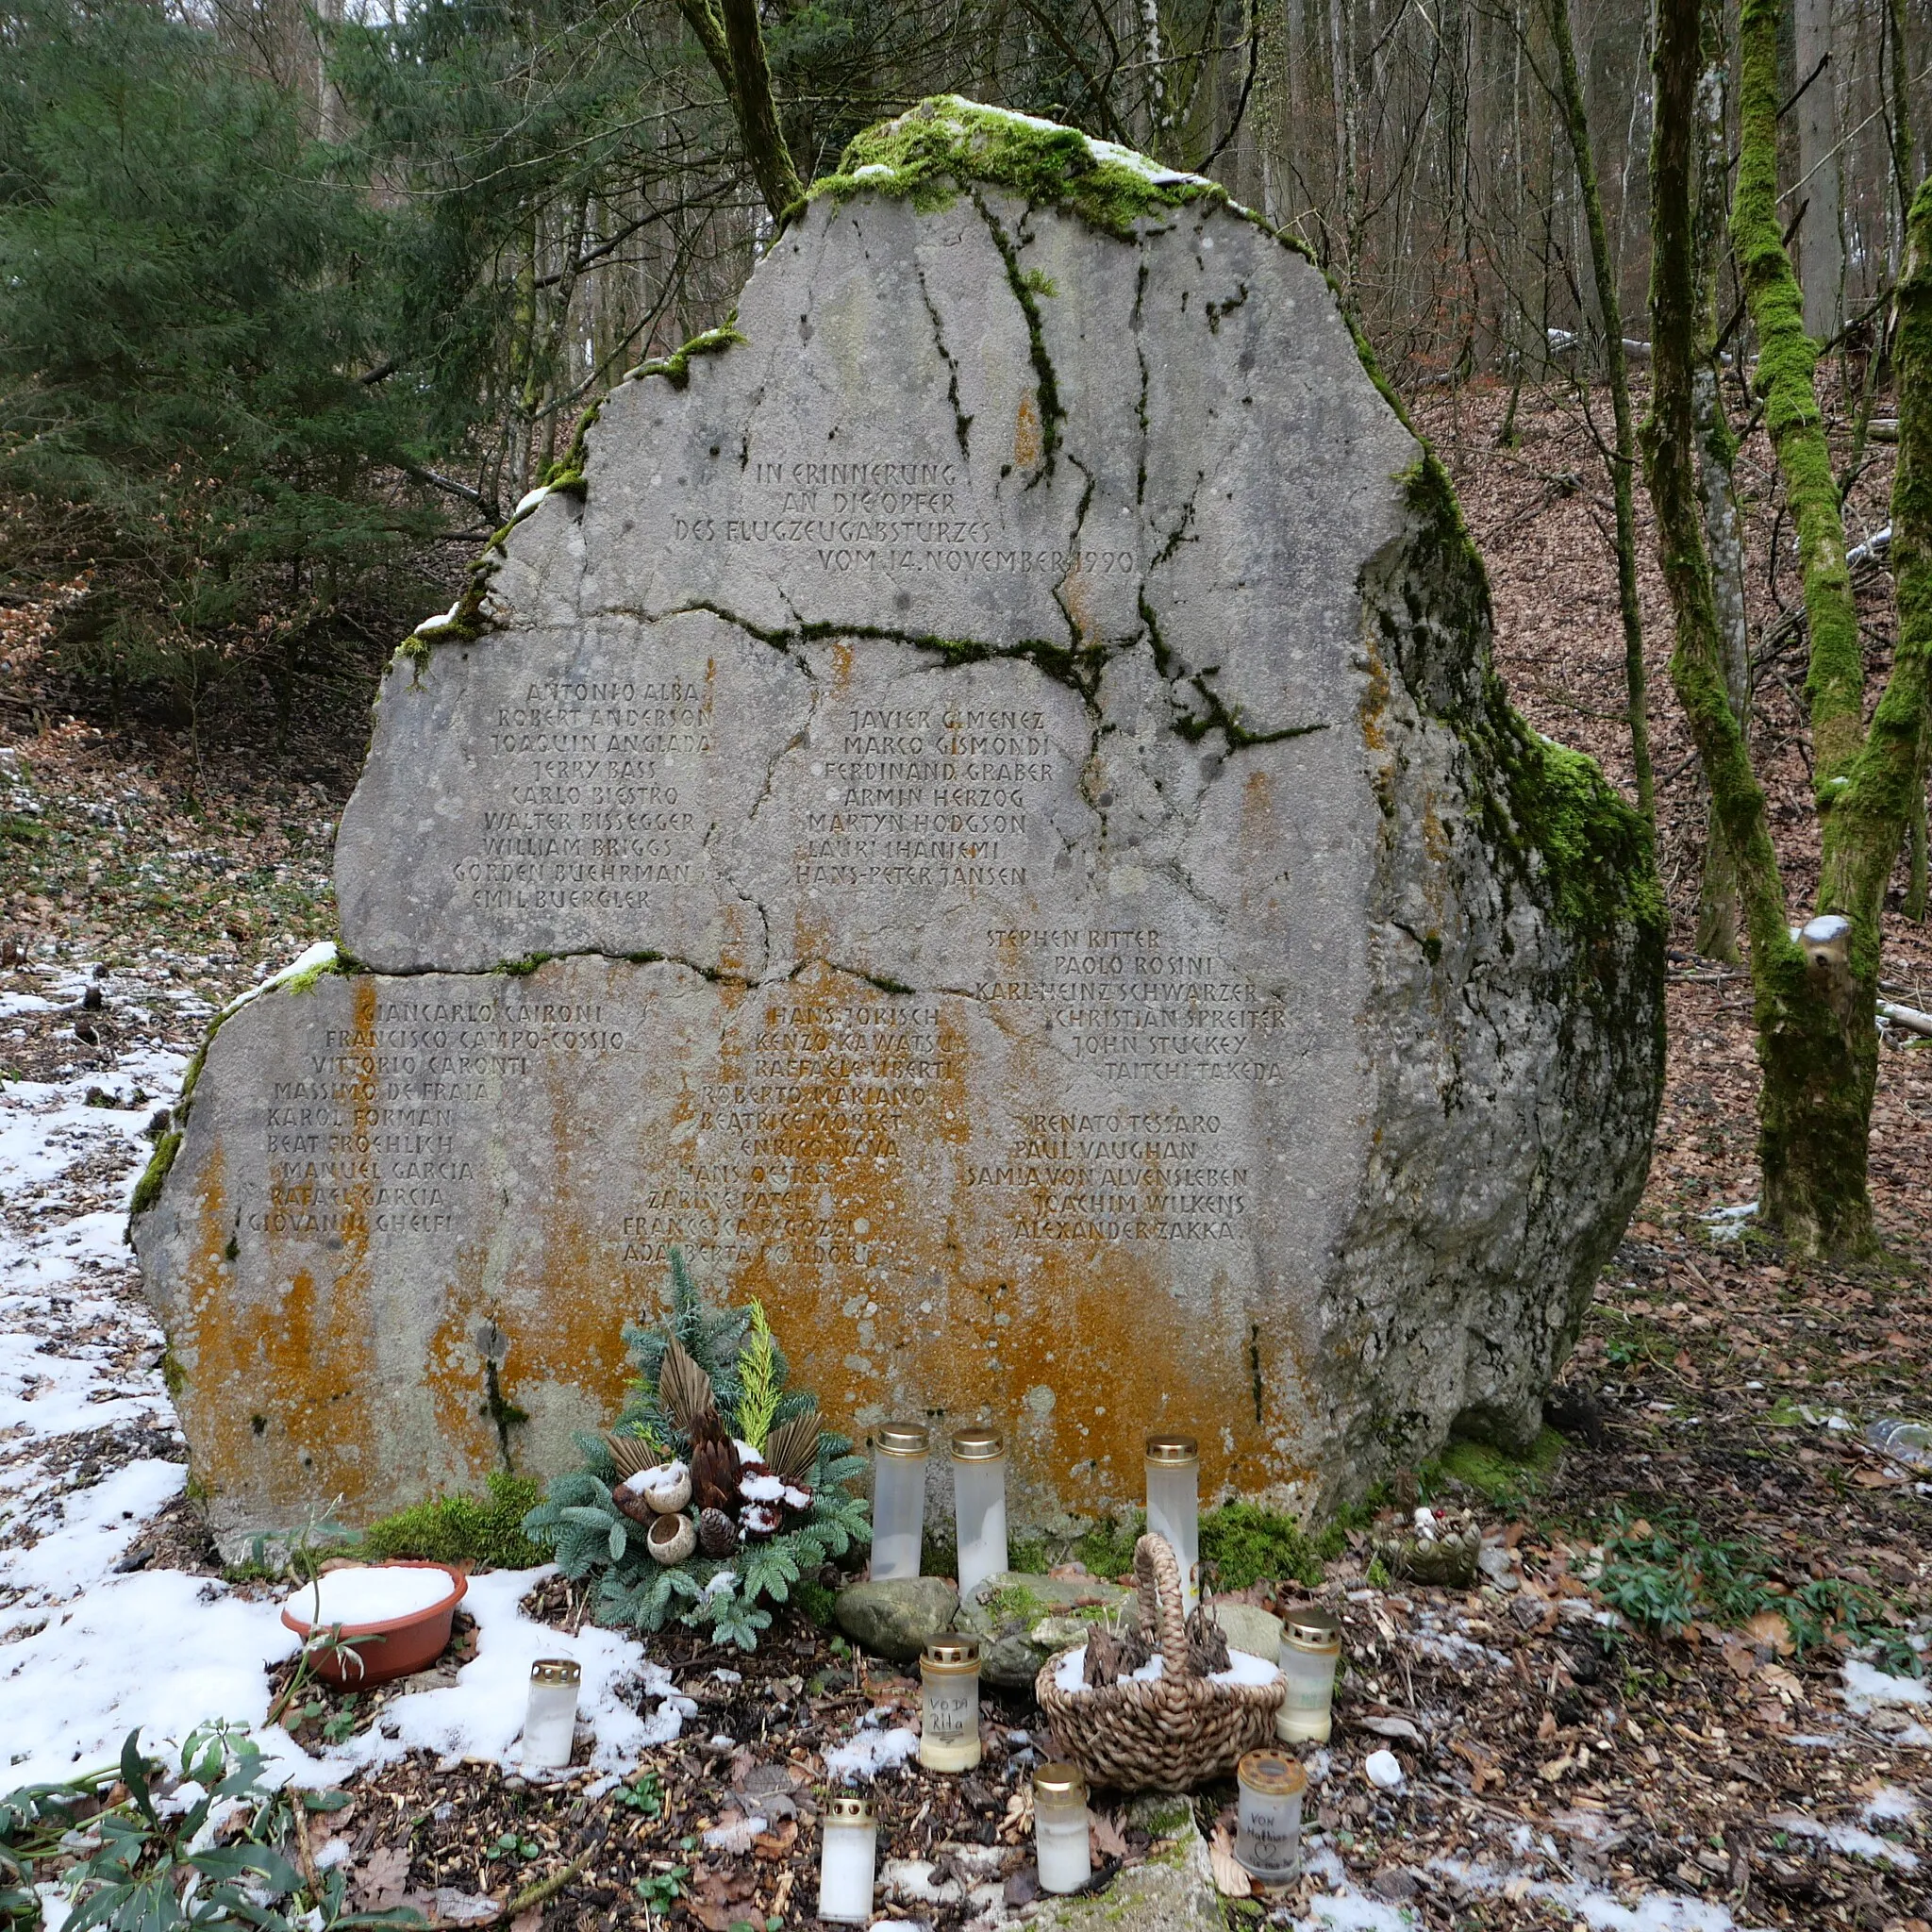 Photo showing: The memorial for the Alitalia Flight 404 of 14 November 1990, which departed from Milan and crashed into the wooded Haggenberg hill as the Douglas DC-9-32 approached Zurich Airport, killing all 46 people on board.